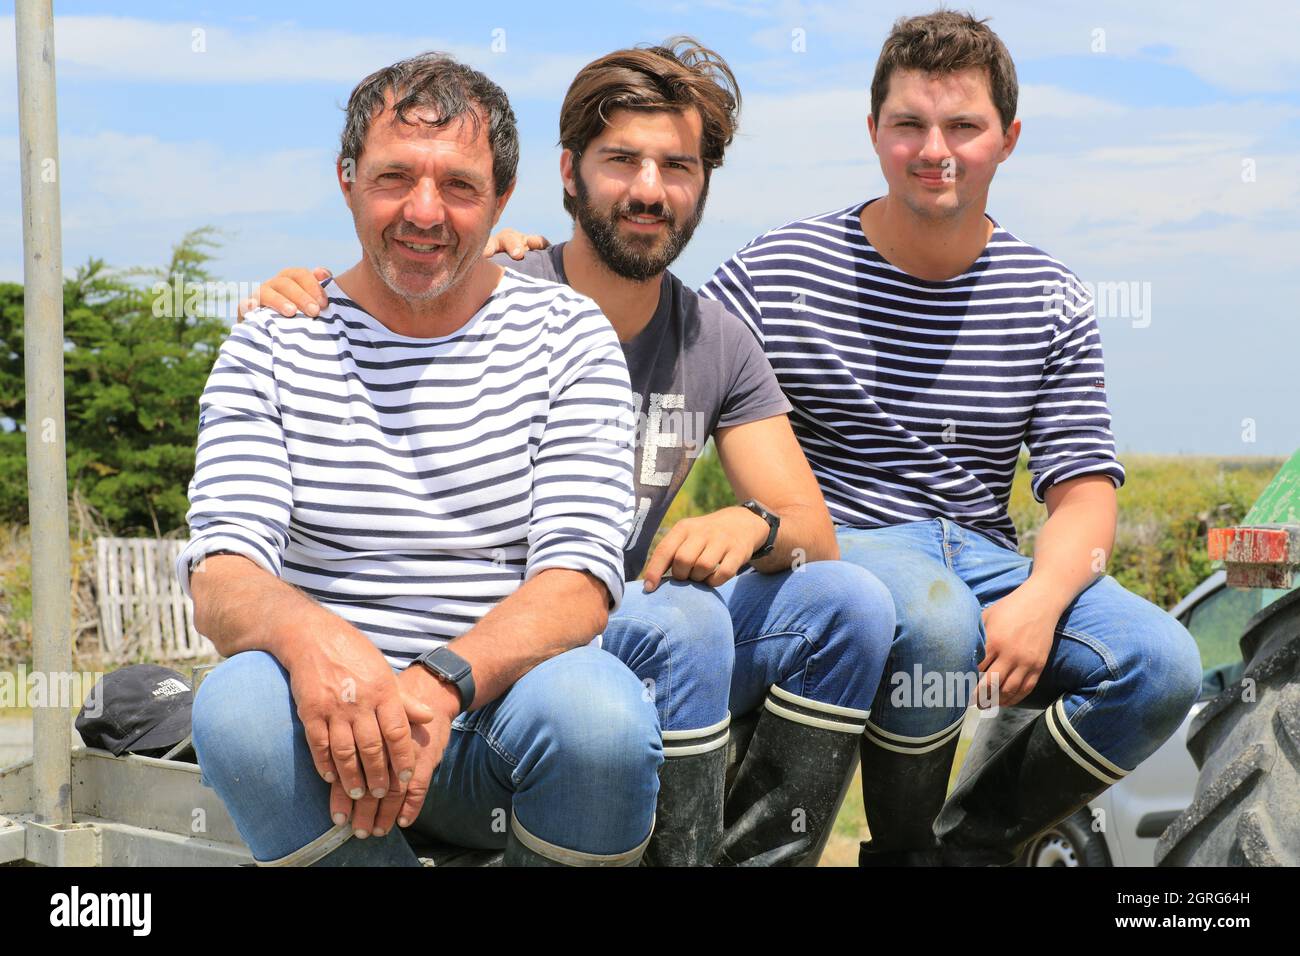 France, Vendee, Noirmoutier island, La Gueriniere, Bonhomme oyster port, Alain Gendron (oyster farmer) and his sons Stock Photo